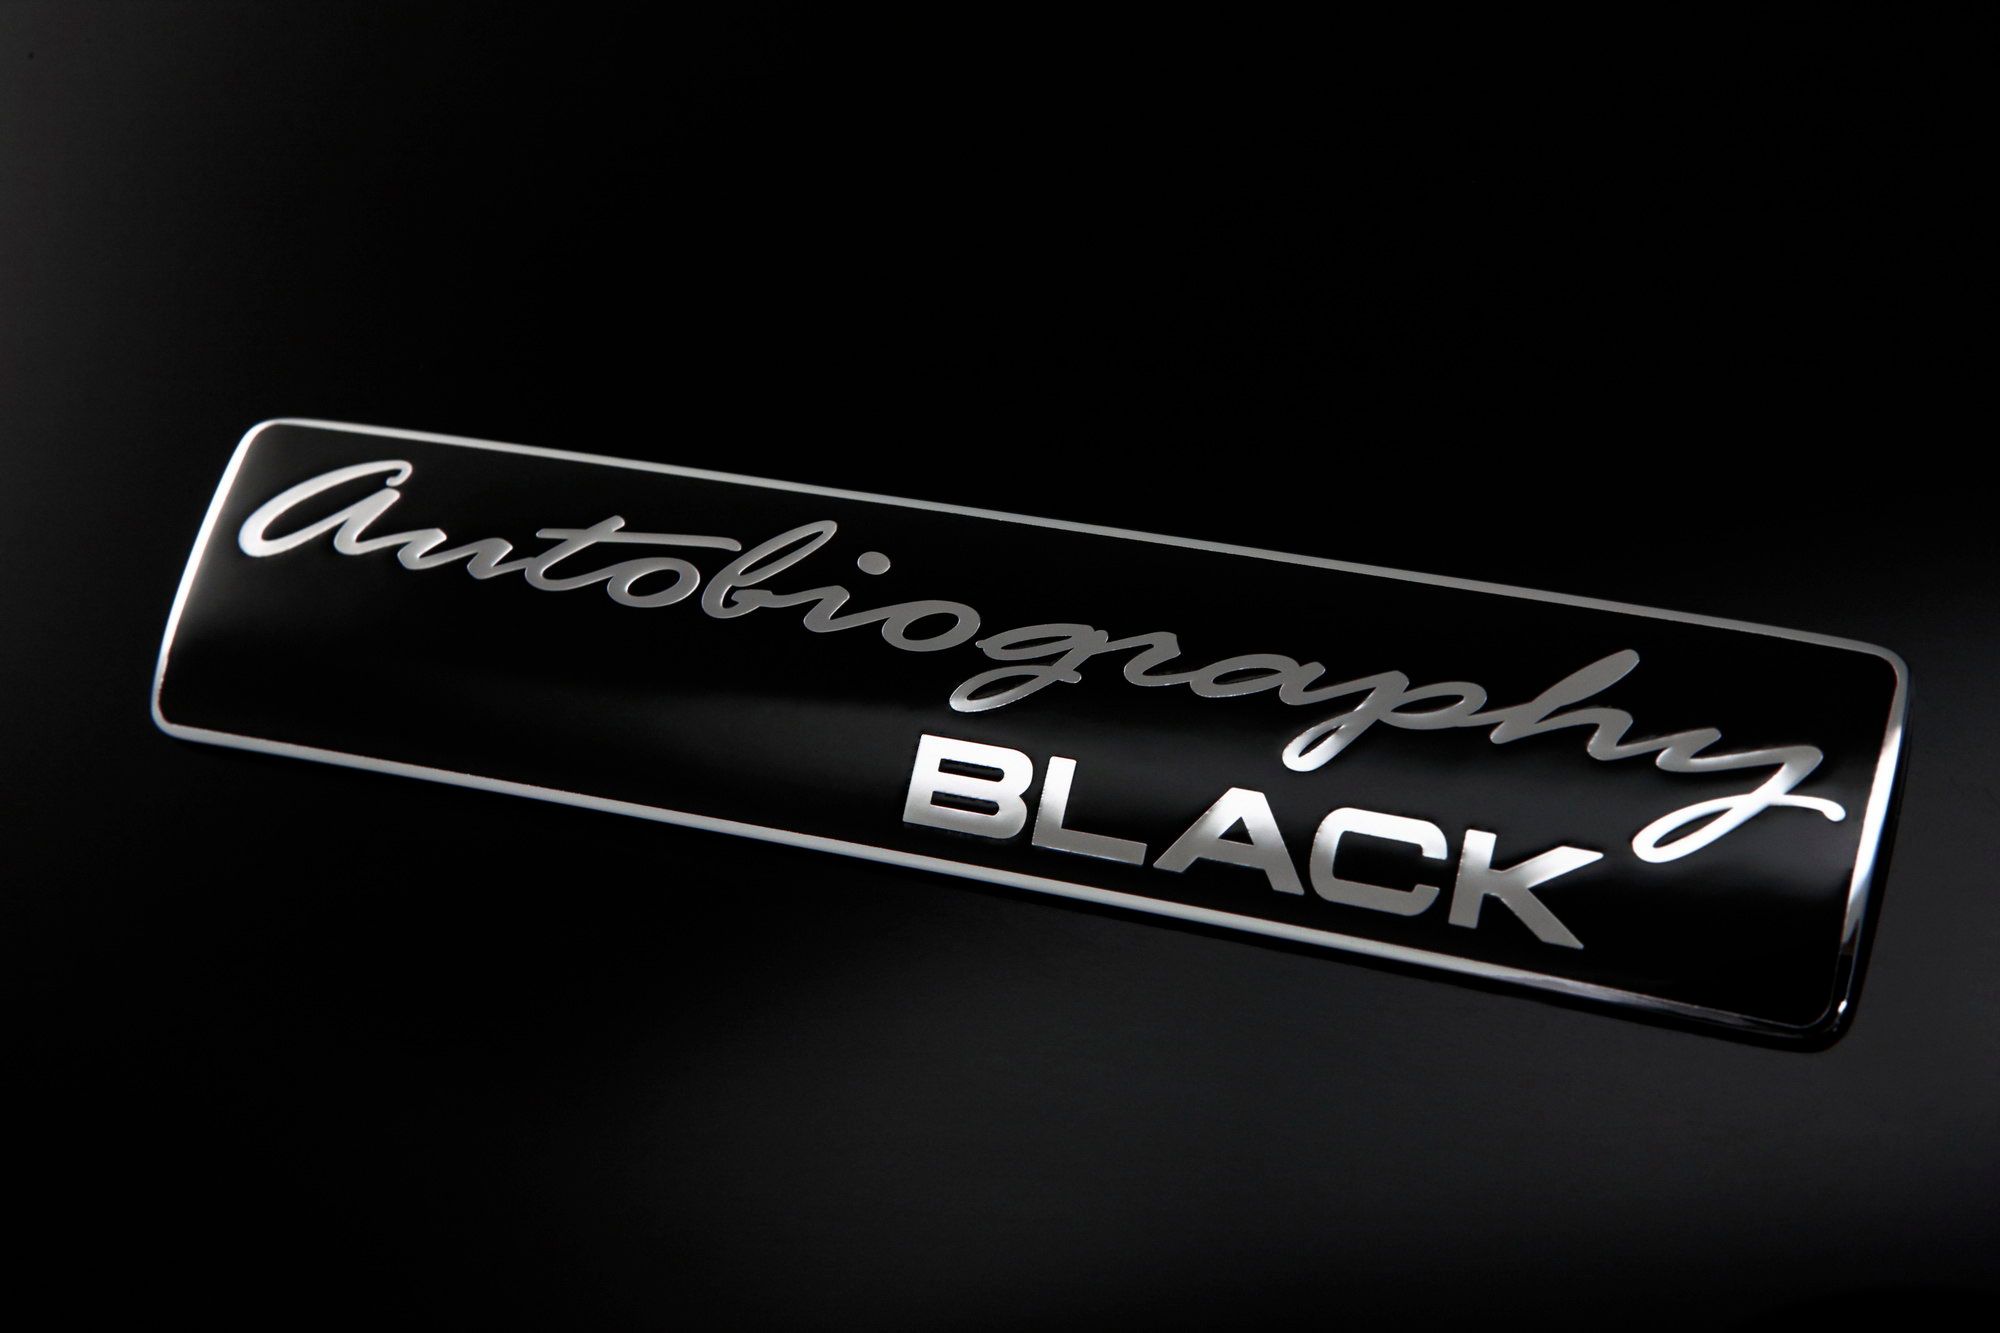 2010 Range Rover Autobiography Black Limited Edition